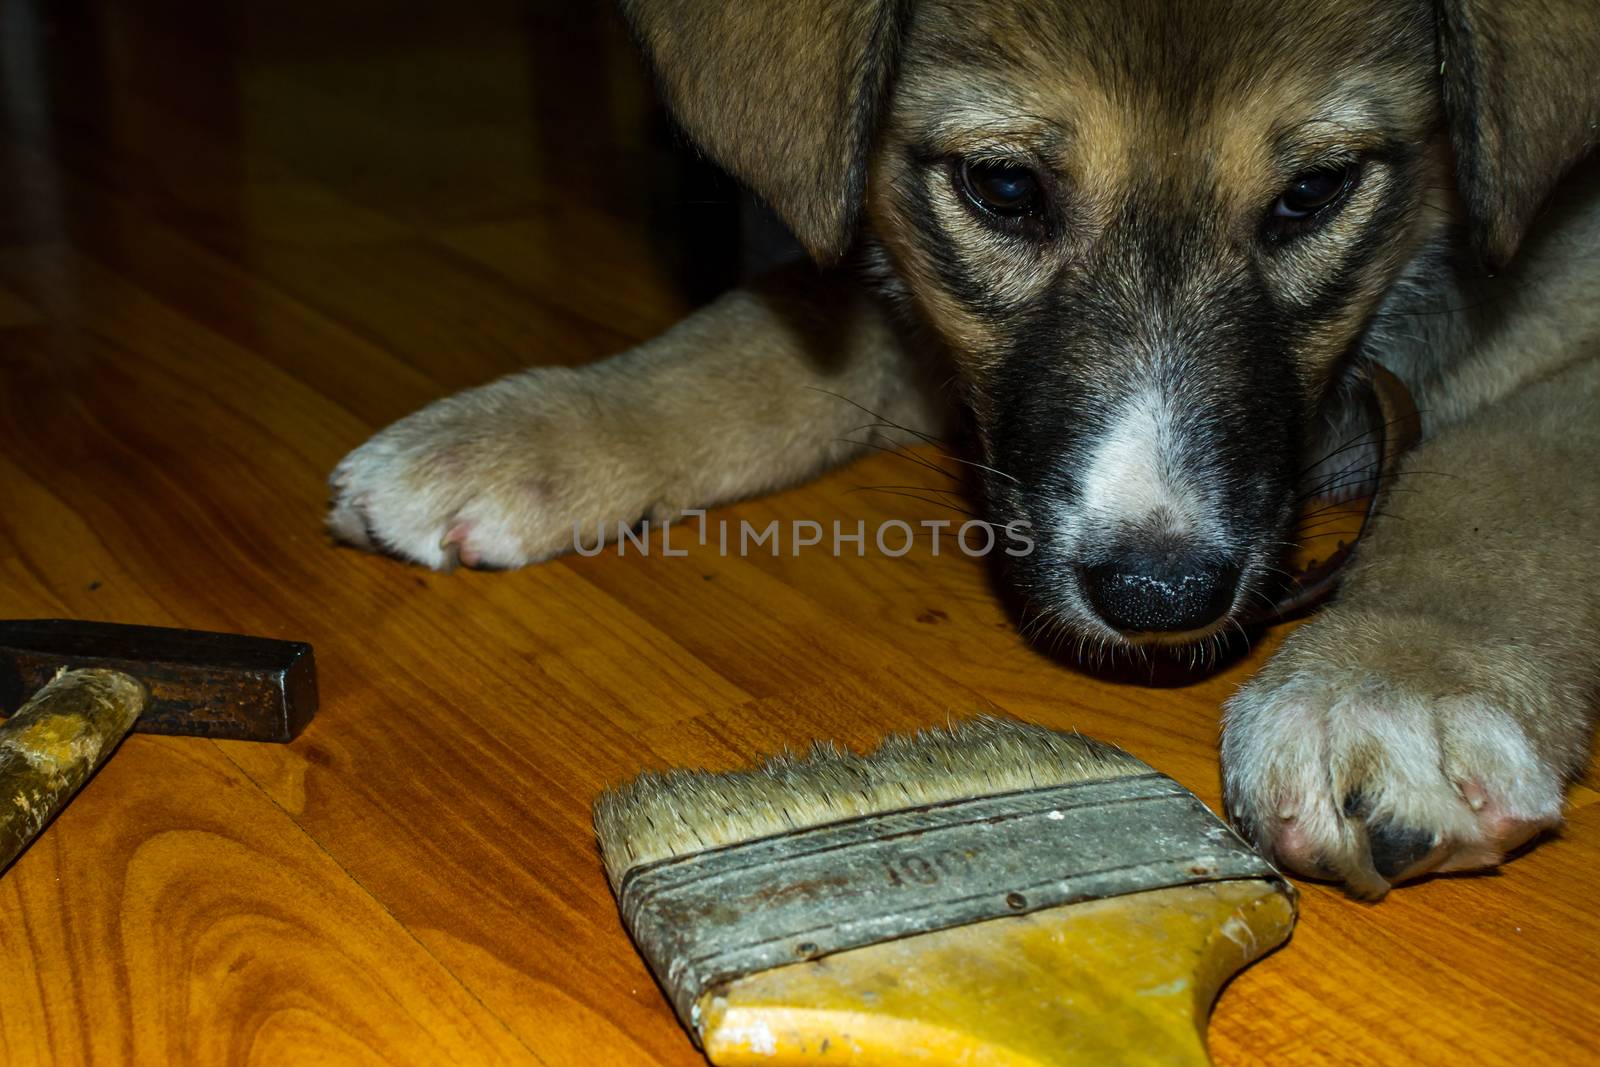 puppy playing with a screwdriver most likely wants to help with the repair